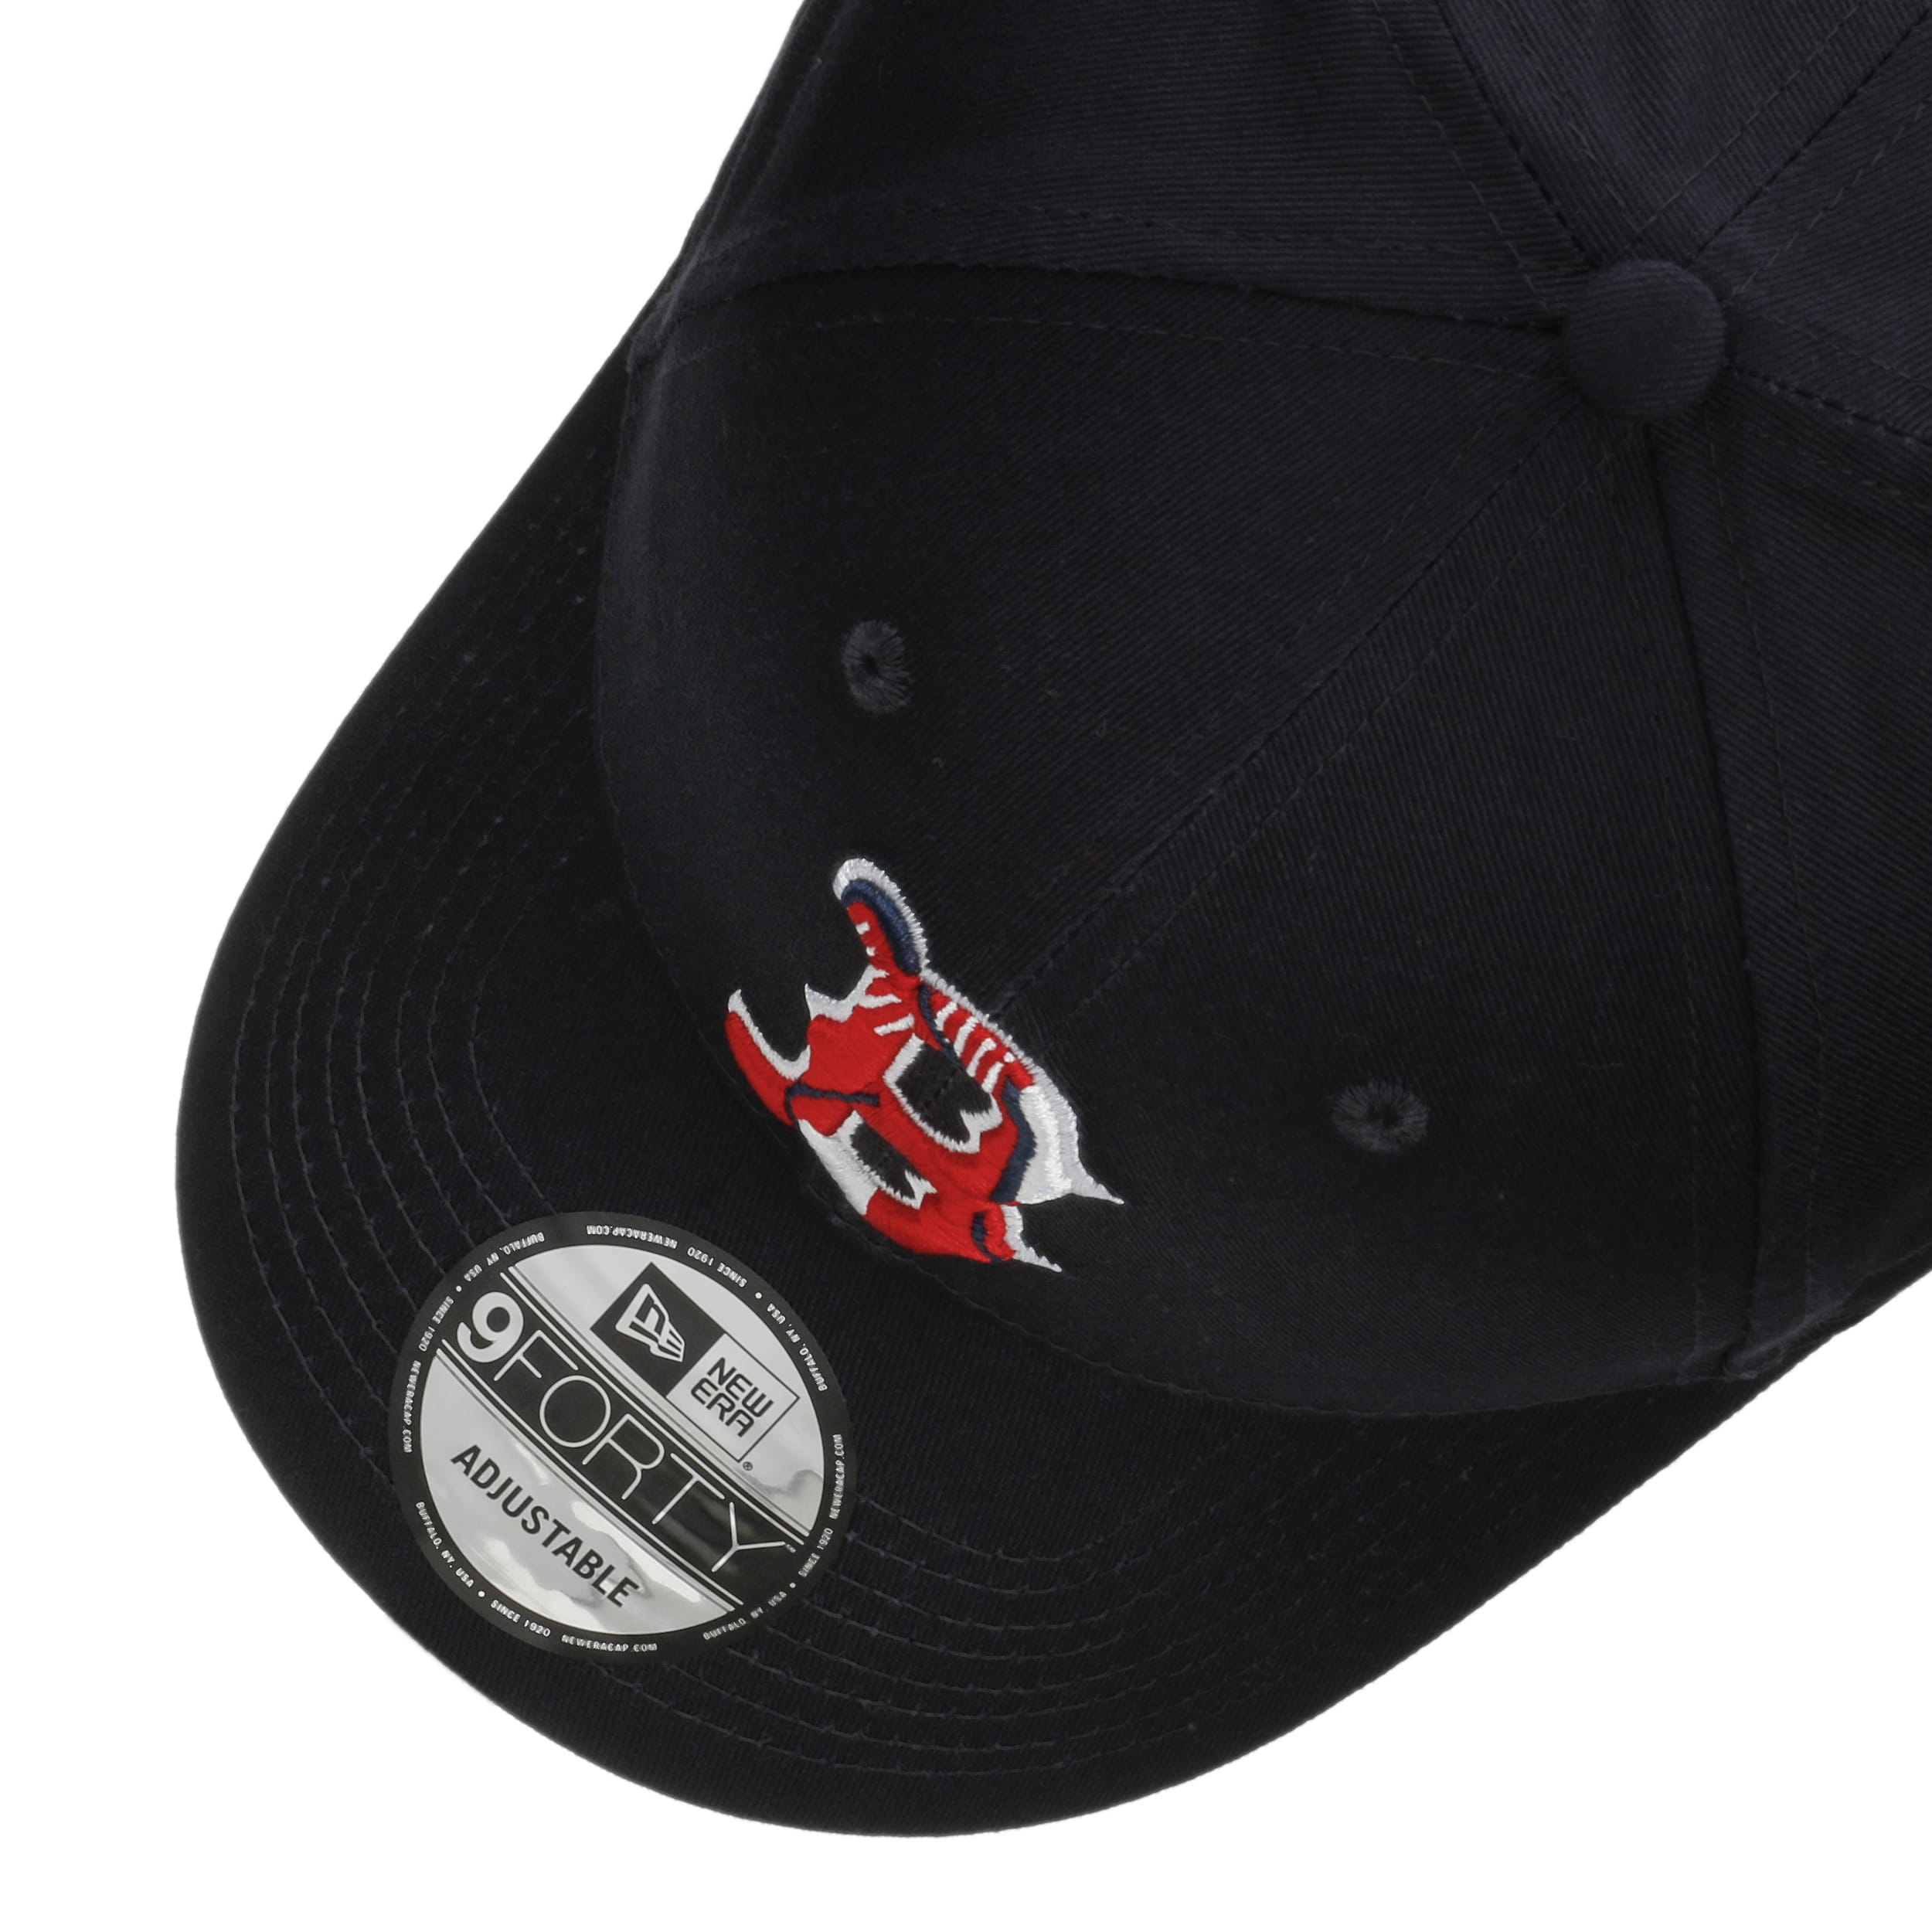 New Era Cap - 9-Forty - Boston Red Sox - Med Brown